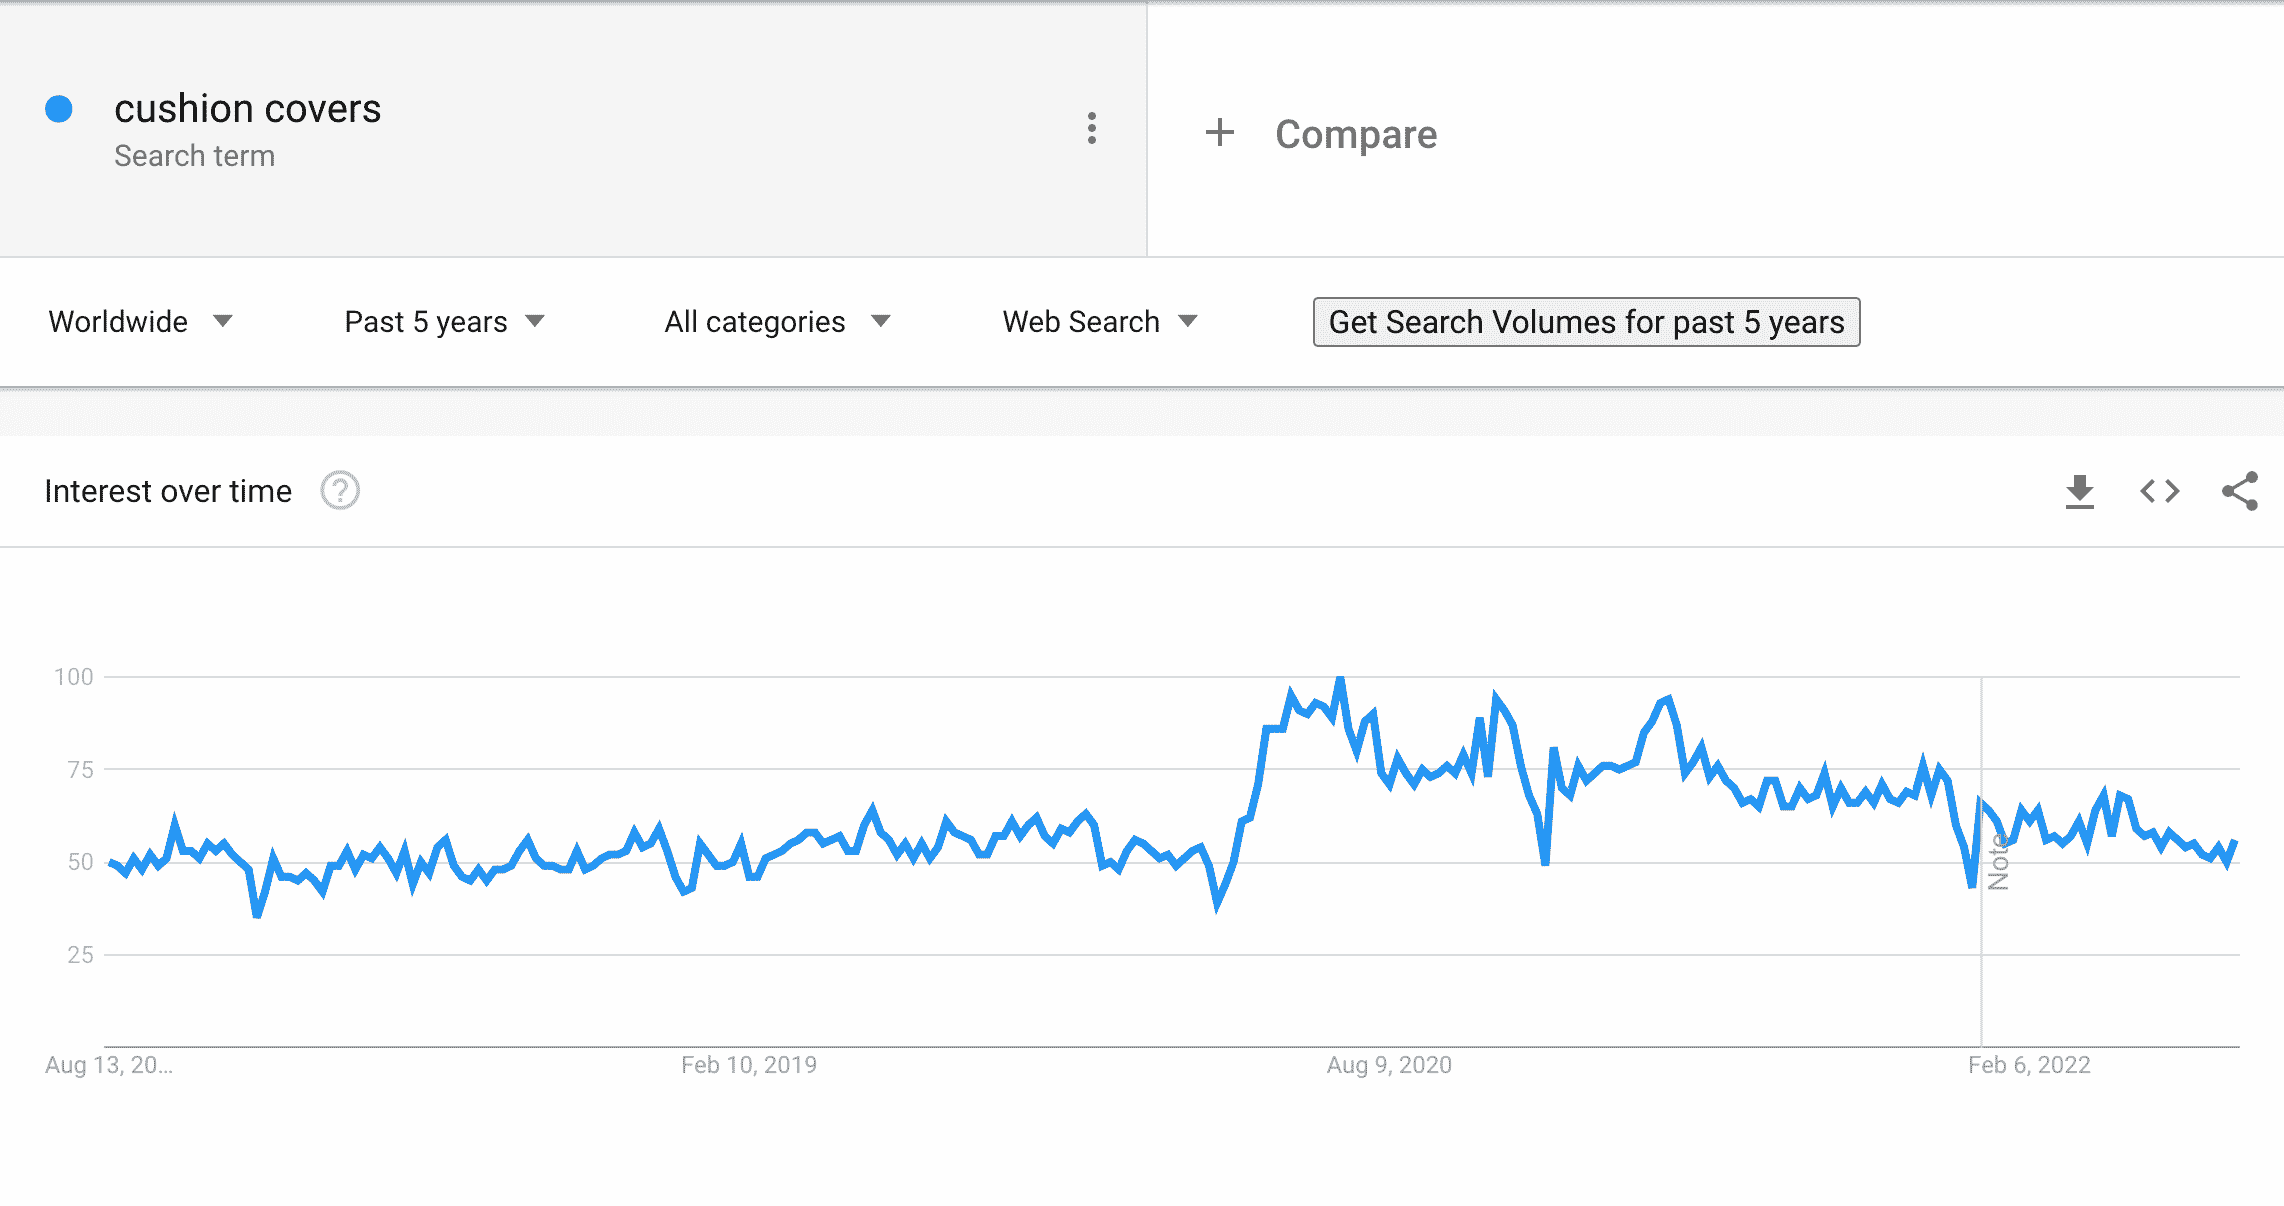 Cushion covers on Google Trends